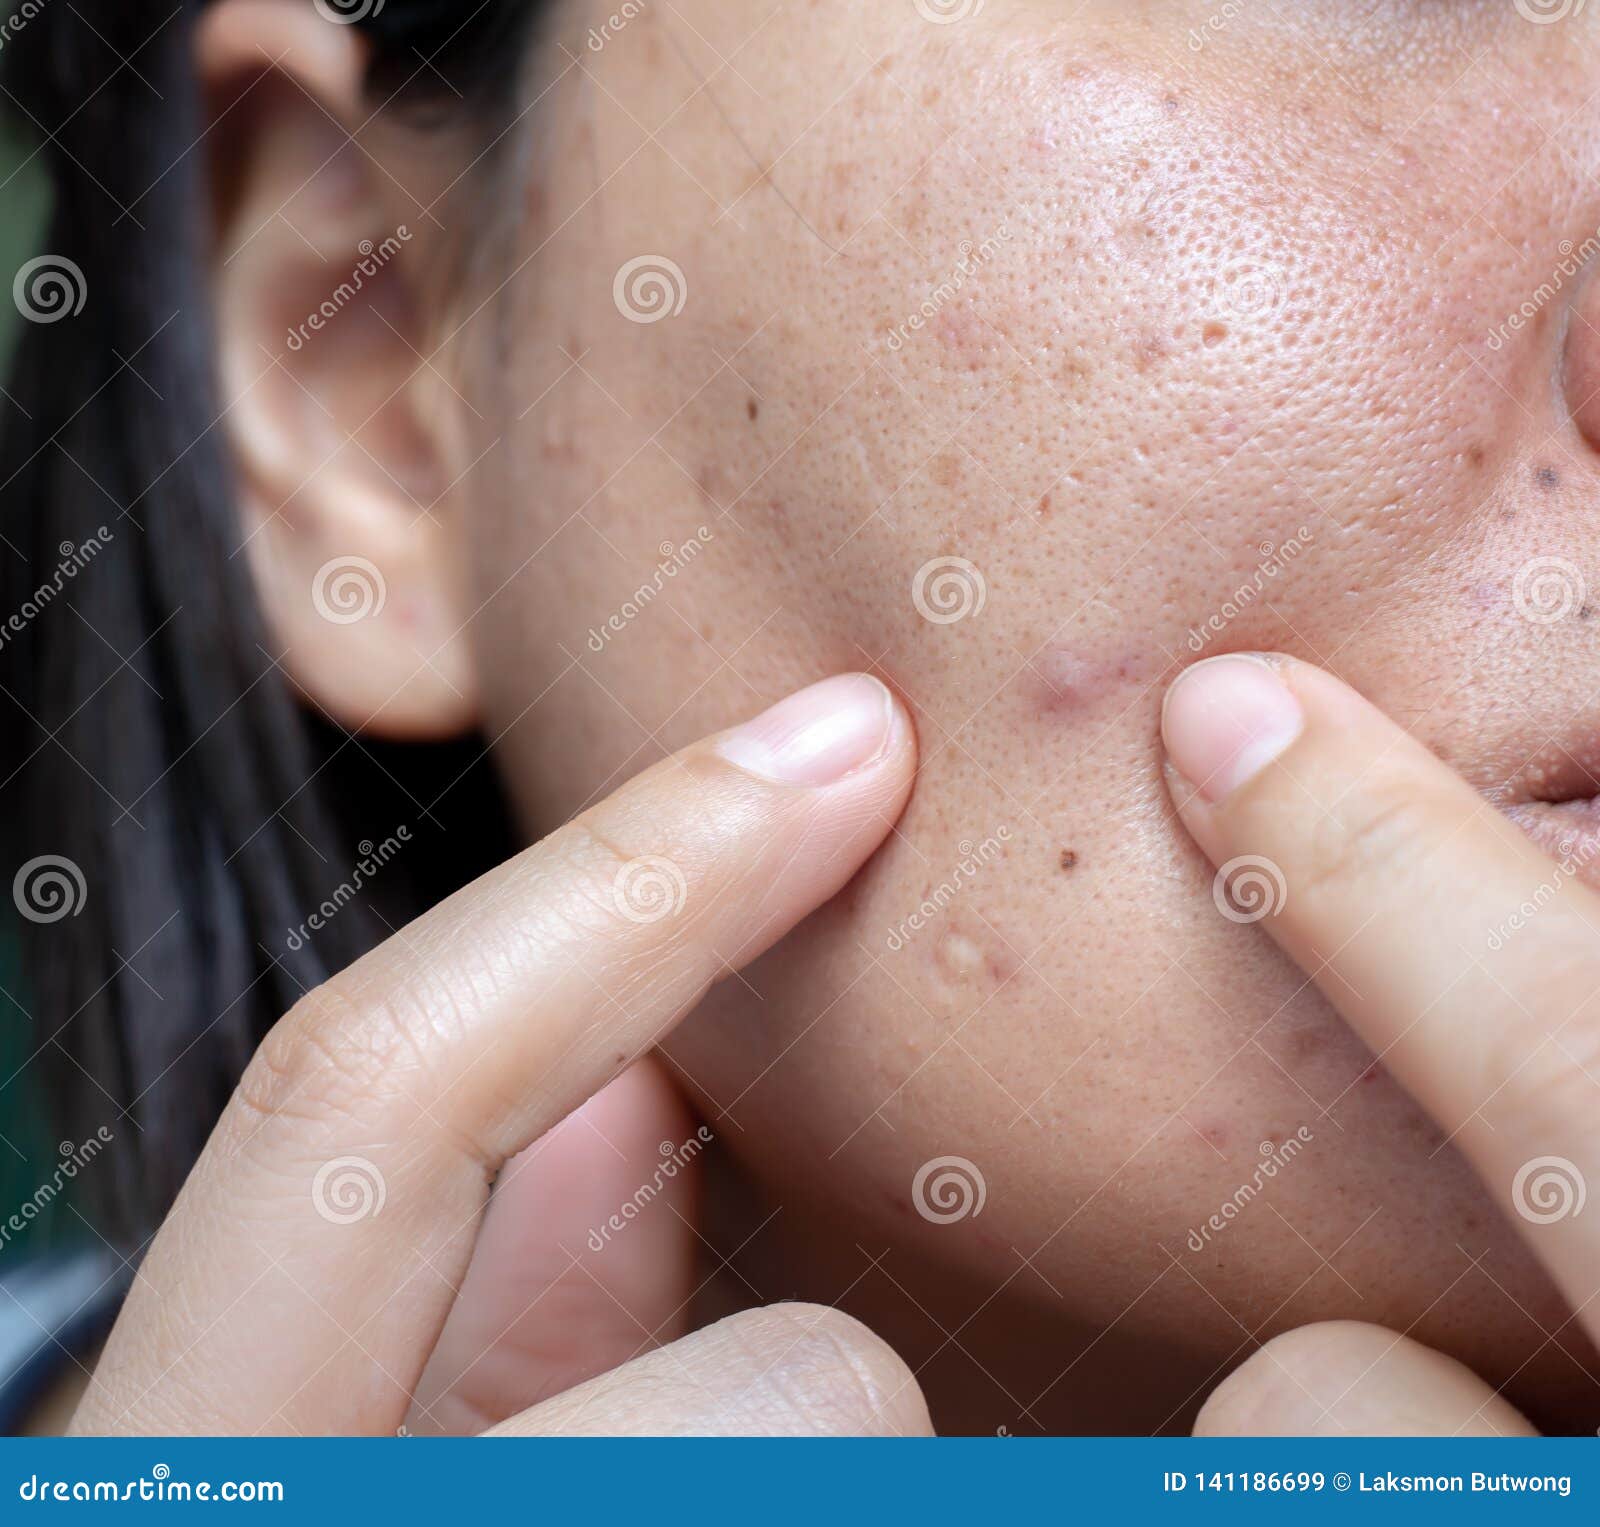 white acne scars on face